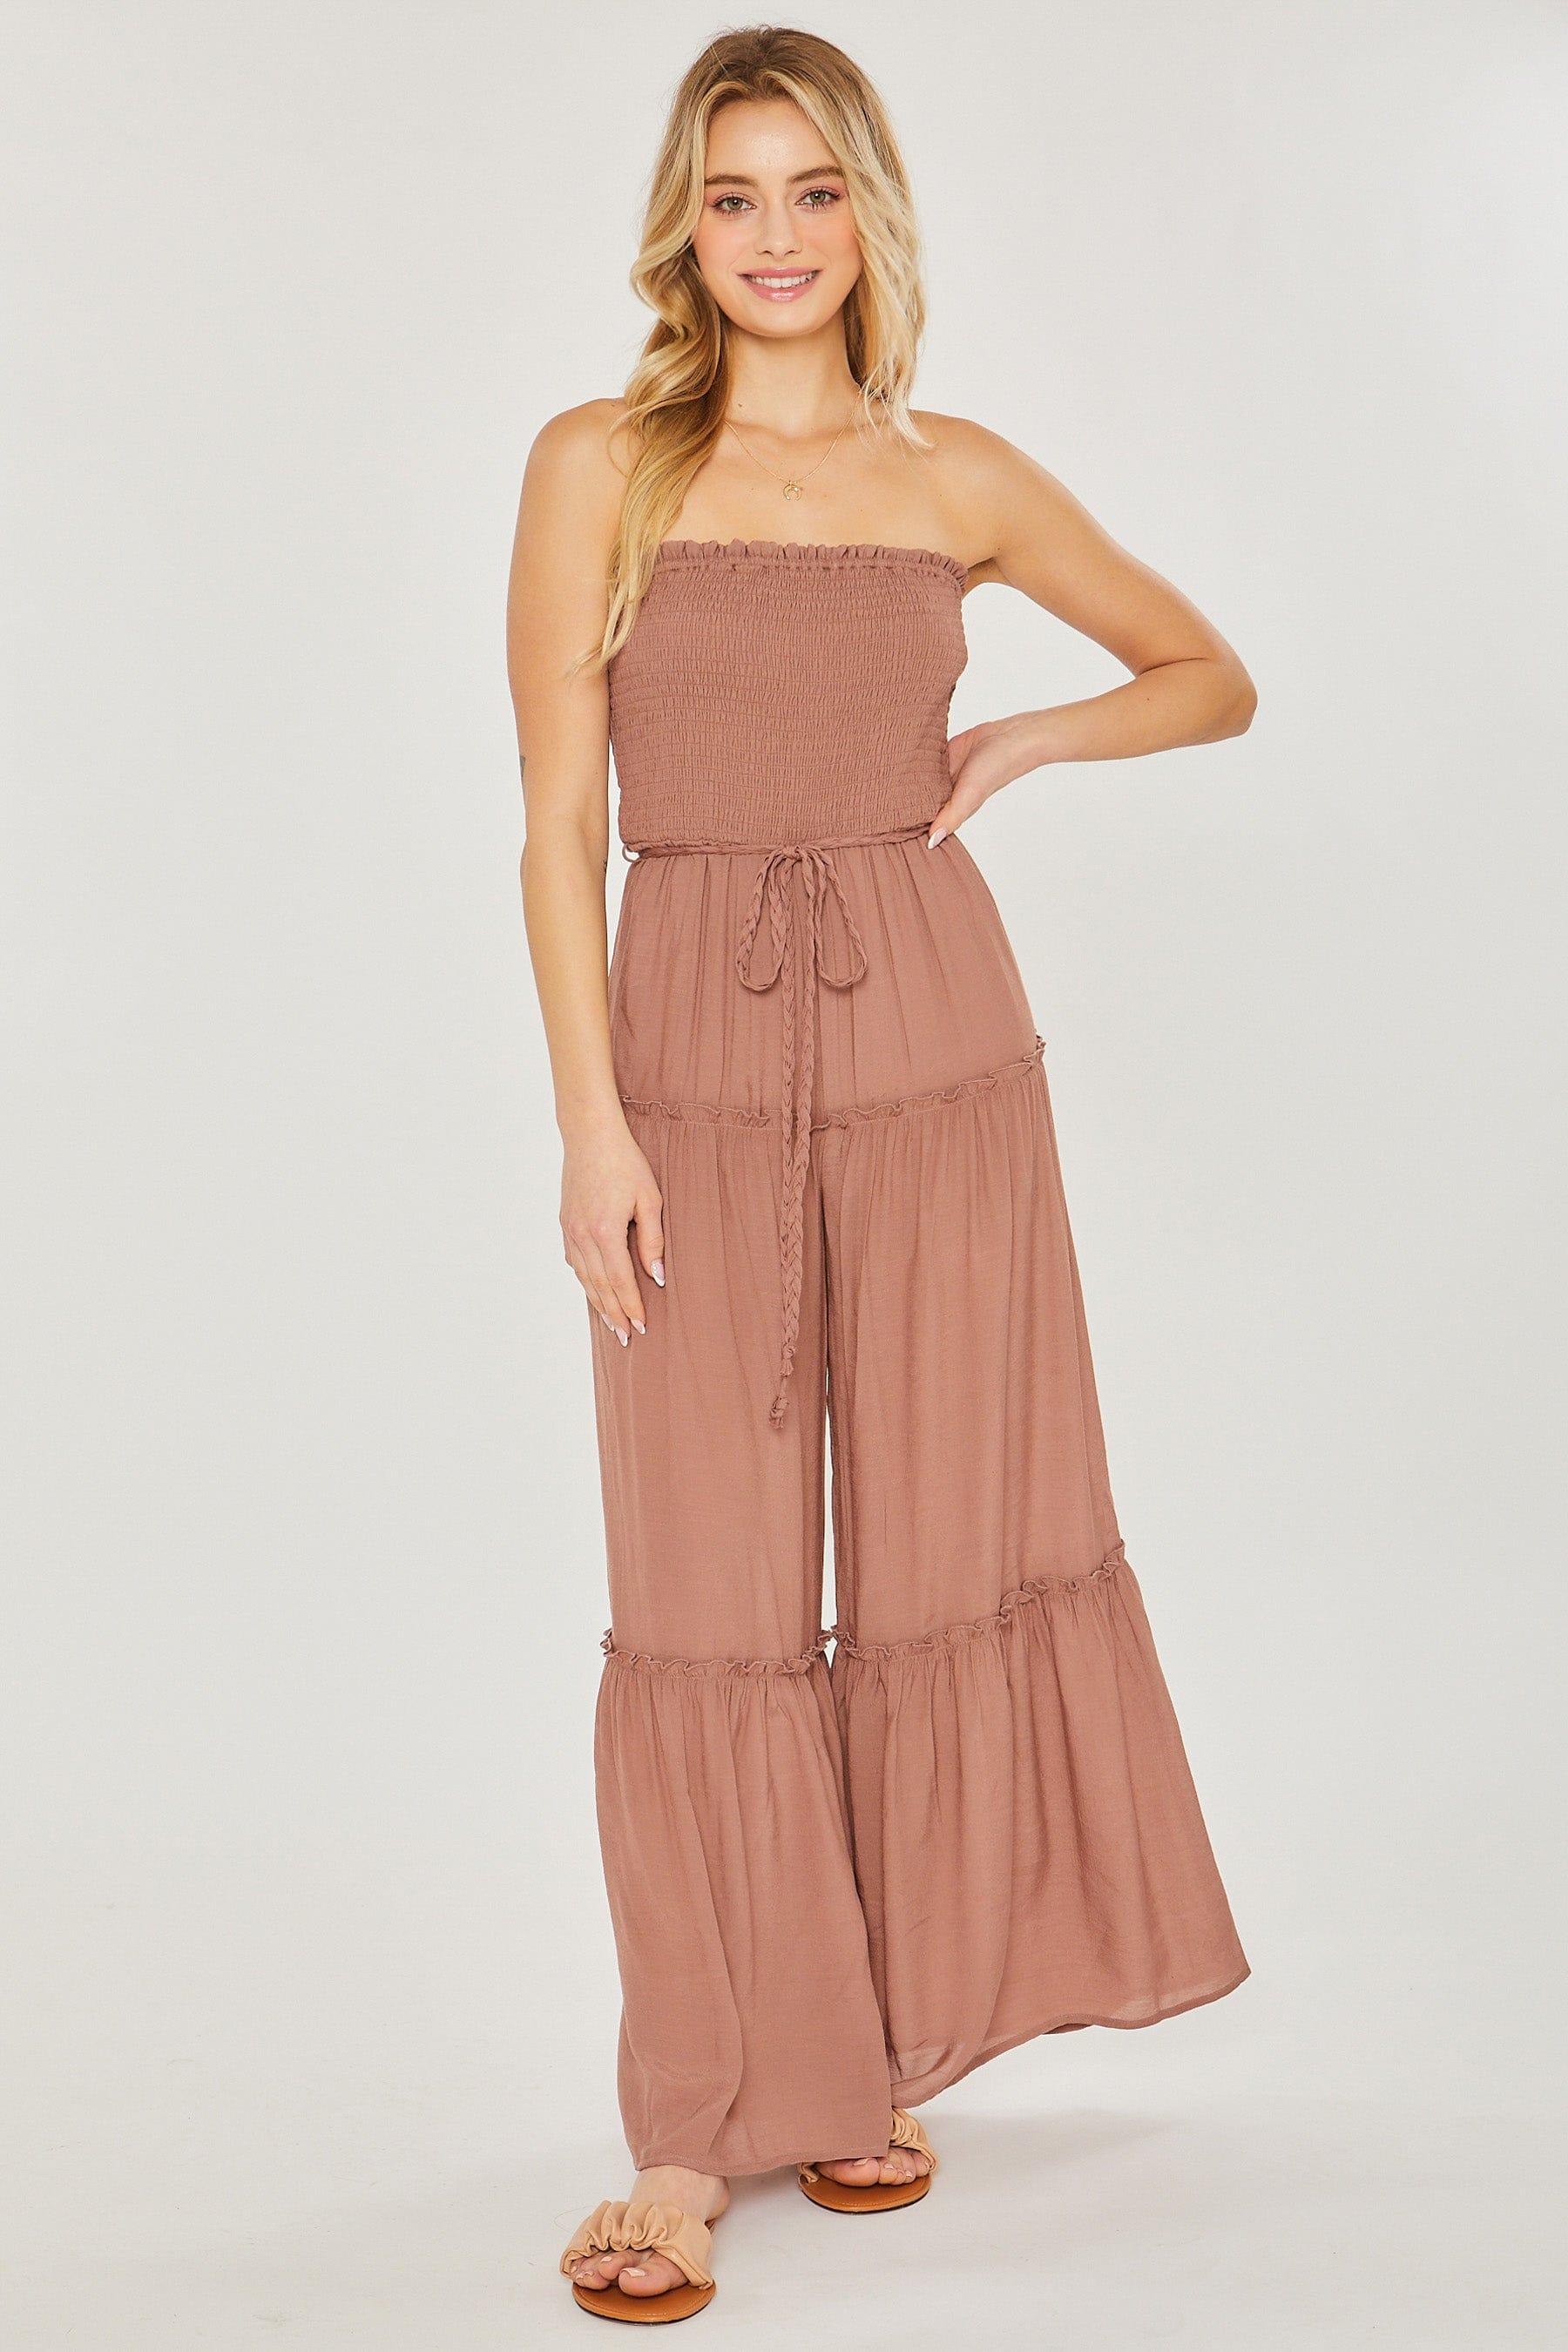 SAVLUXE Jumpsuits & Rompers S Clay Woven Solid Sleeveless Smocked Ruffle Jumpsuit